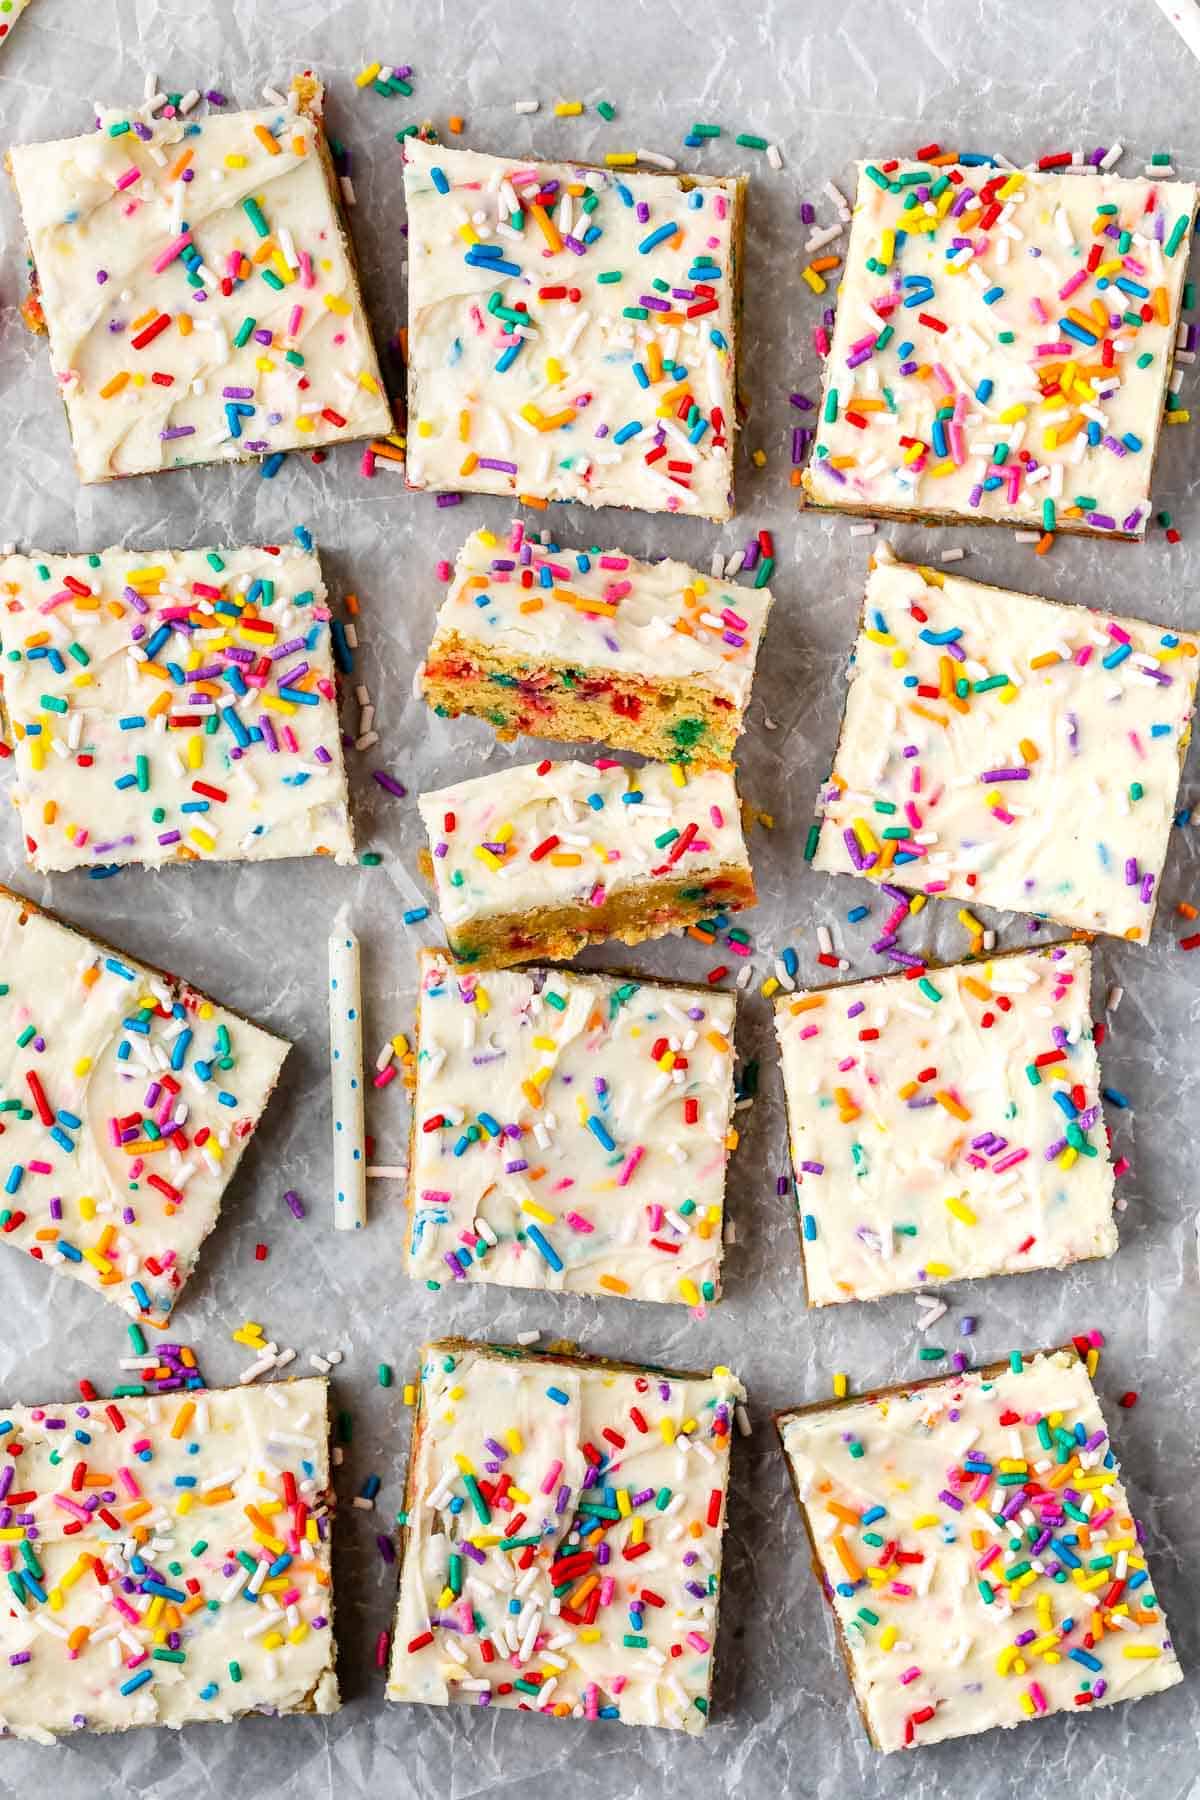 funfetti bars laid out on parchment paper with rainbow sprinkled sprinkled on top